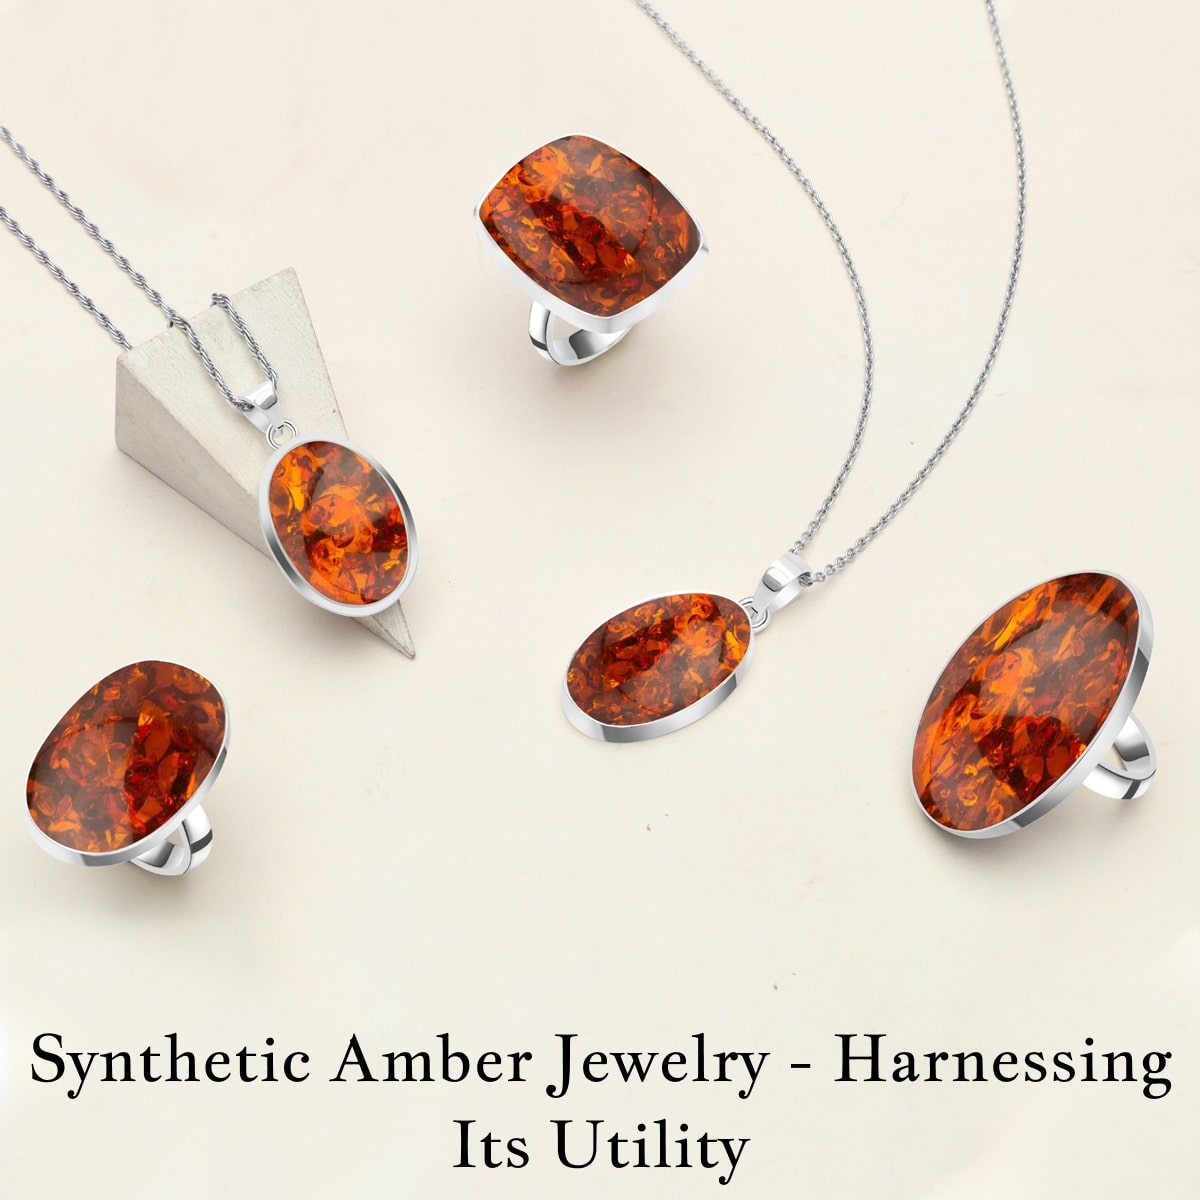 Uses of Synthetic Amber Jewel